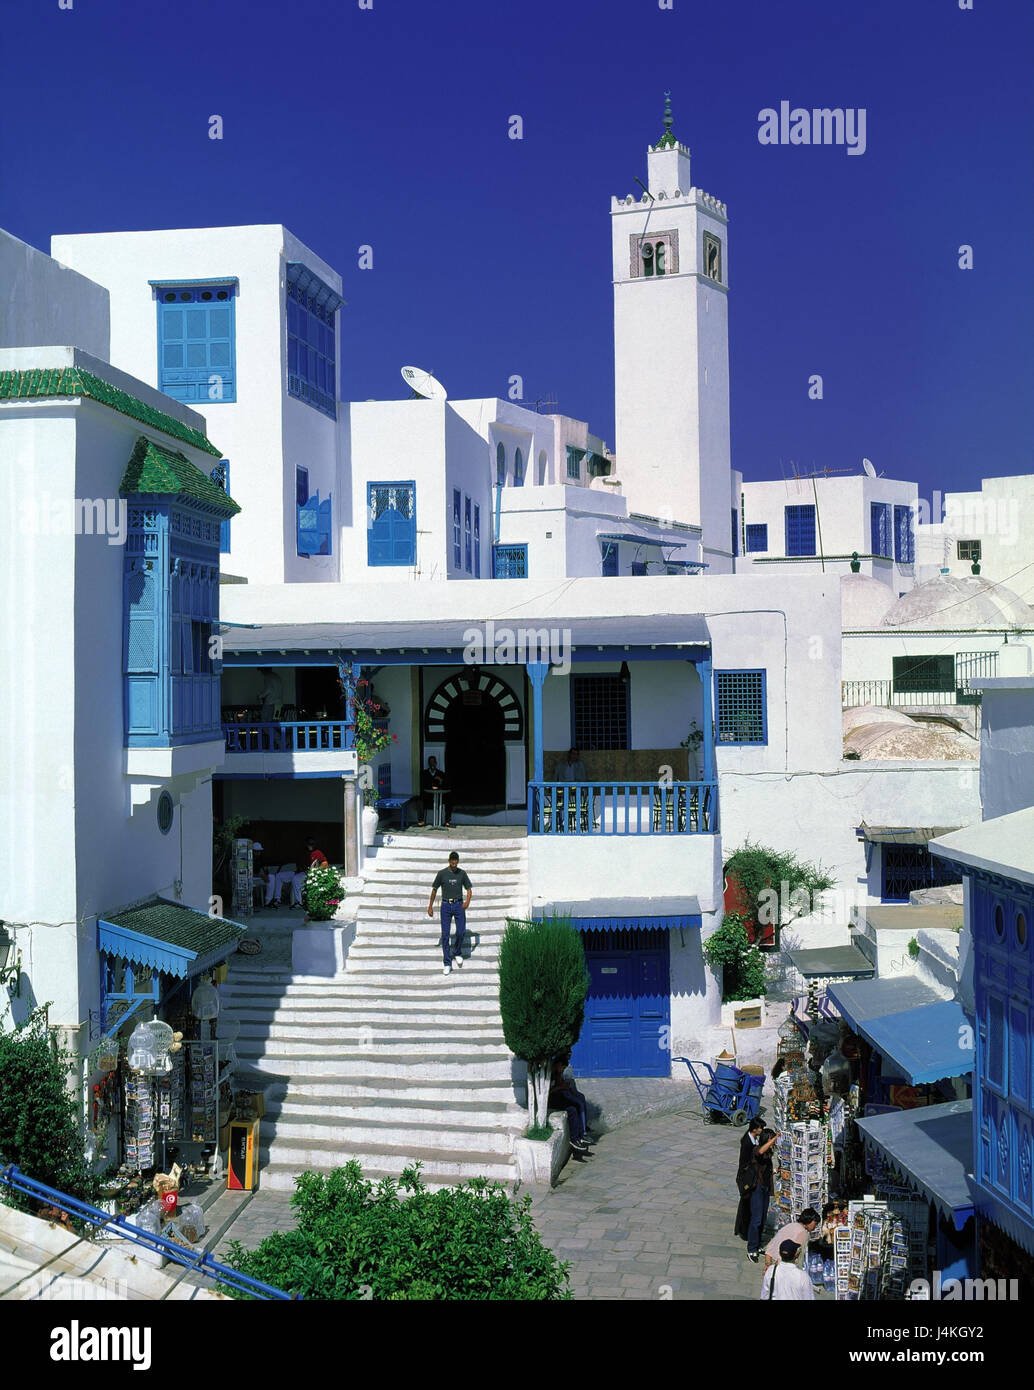 Tunisia, Sidi Bou Said, local view, lane, cafe, stairs, bell tower village Künster, place, close Tunis, architecture, in Andalusian way, holiday resort, tourism Stock Photo